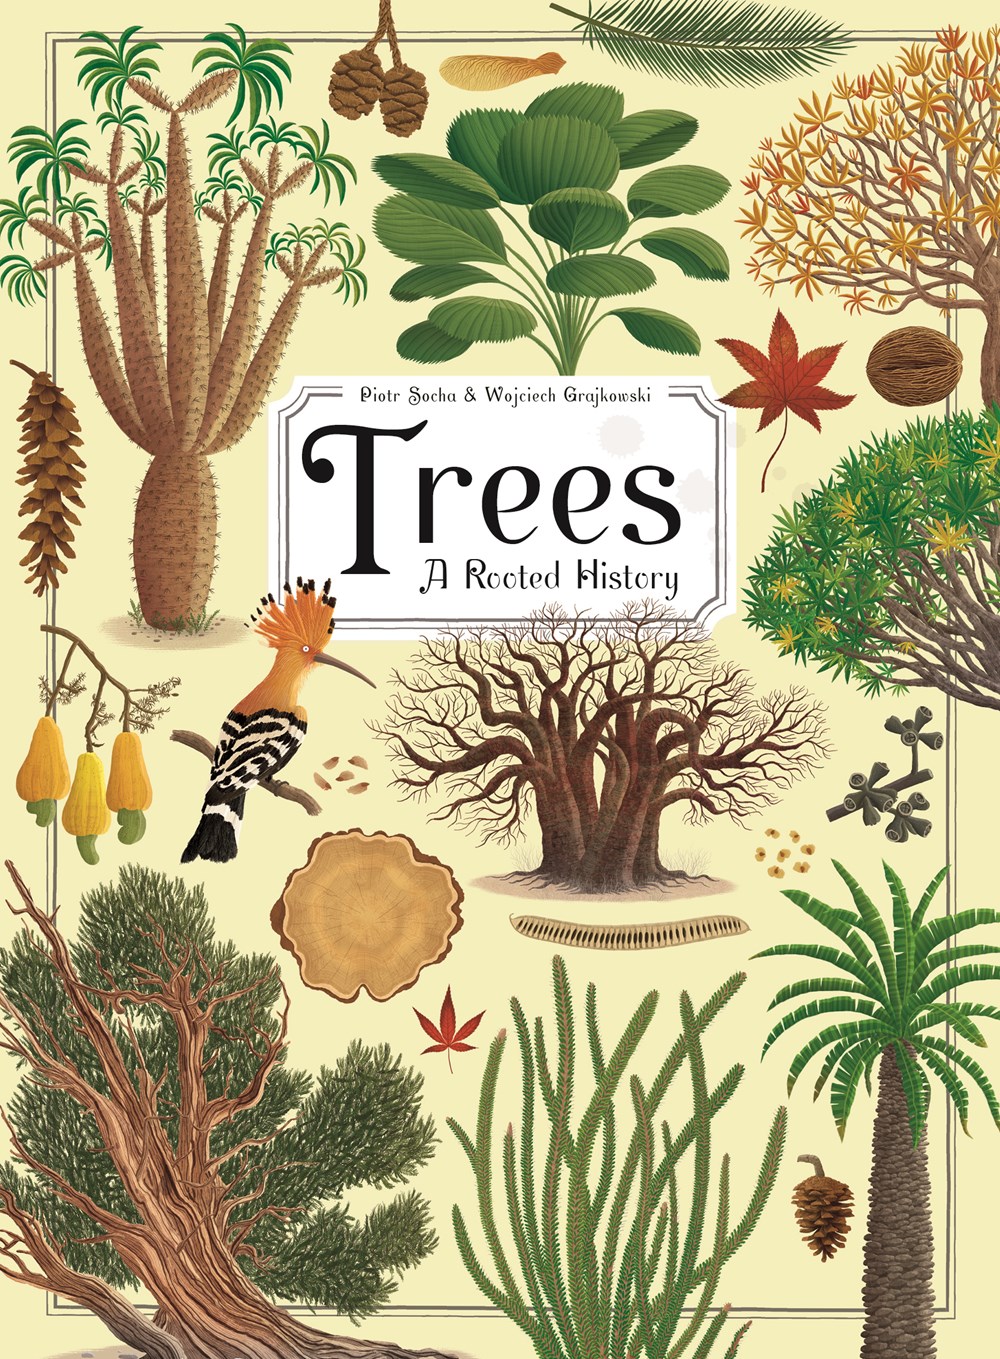 Out Today! Trees: A Rooted History by Piotr Socha and Wojciech
Grajkowski